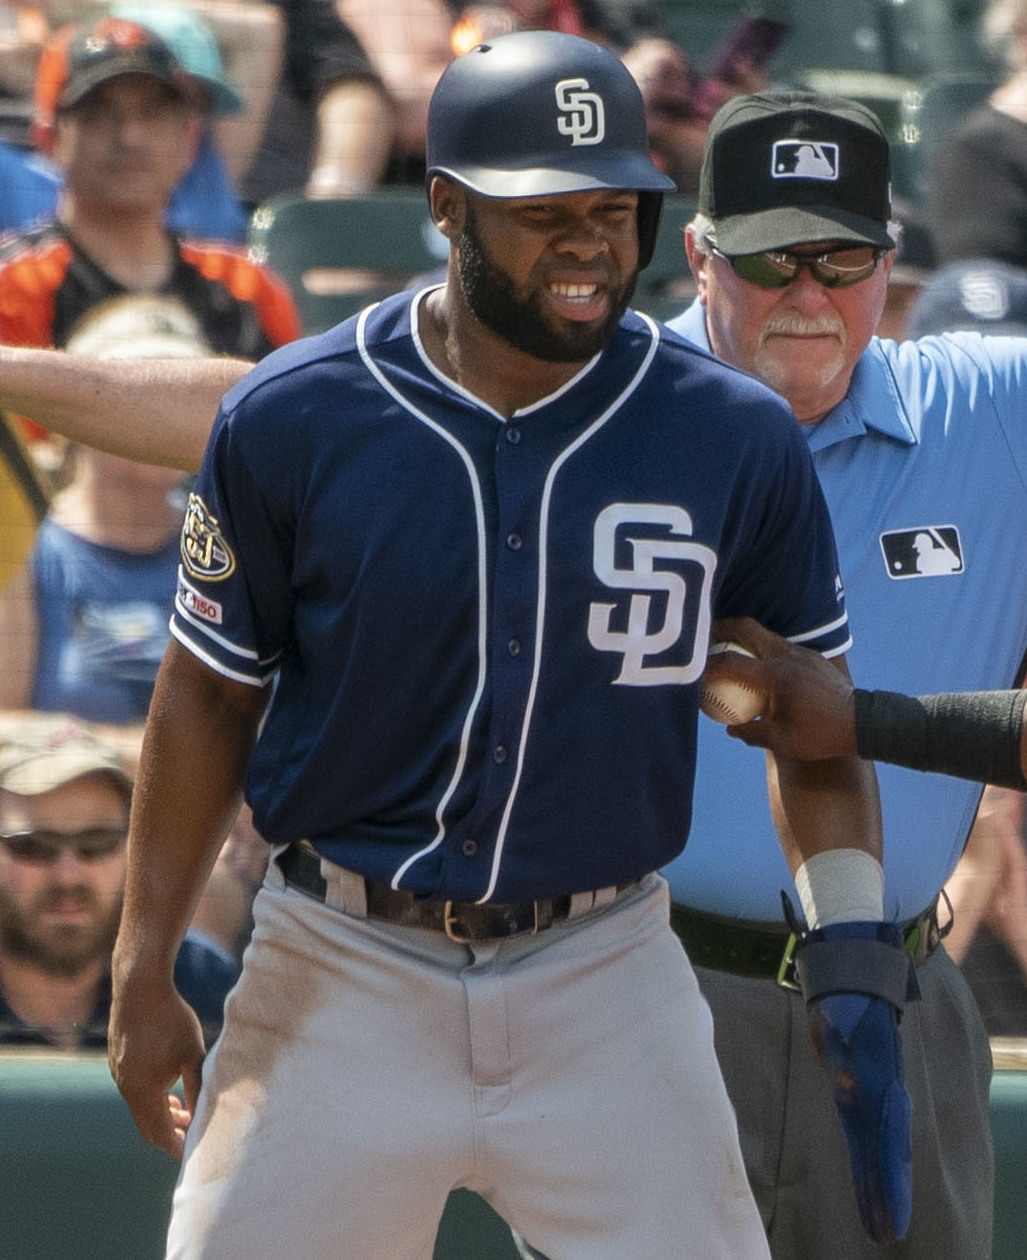 The Padres Manuel Margot glares into the middle of the infield after reaching first base